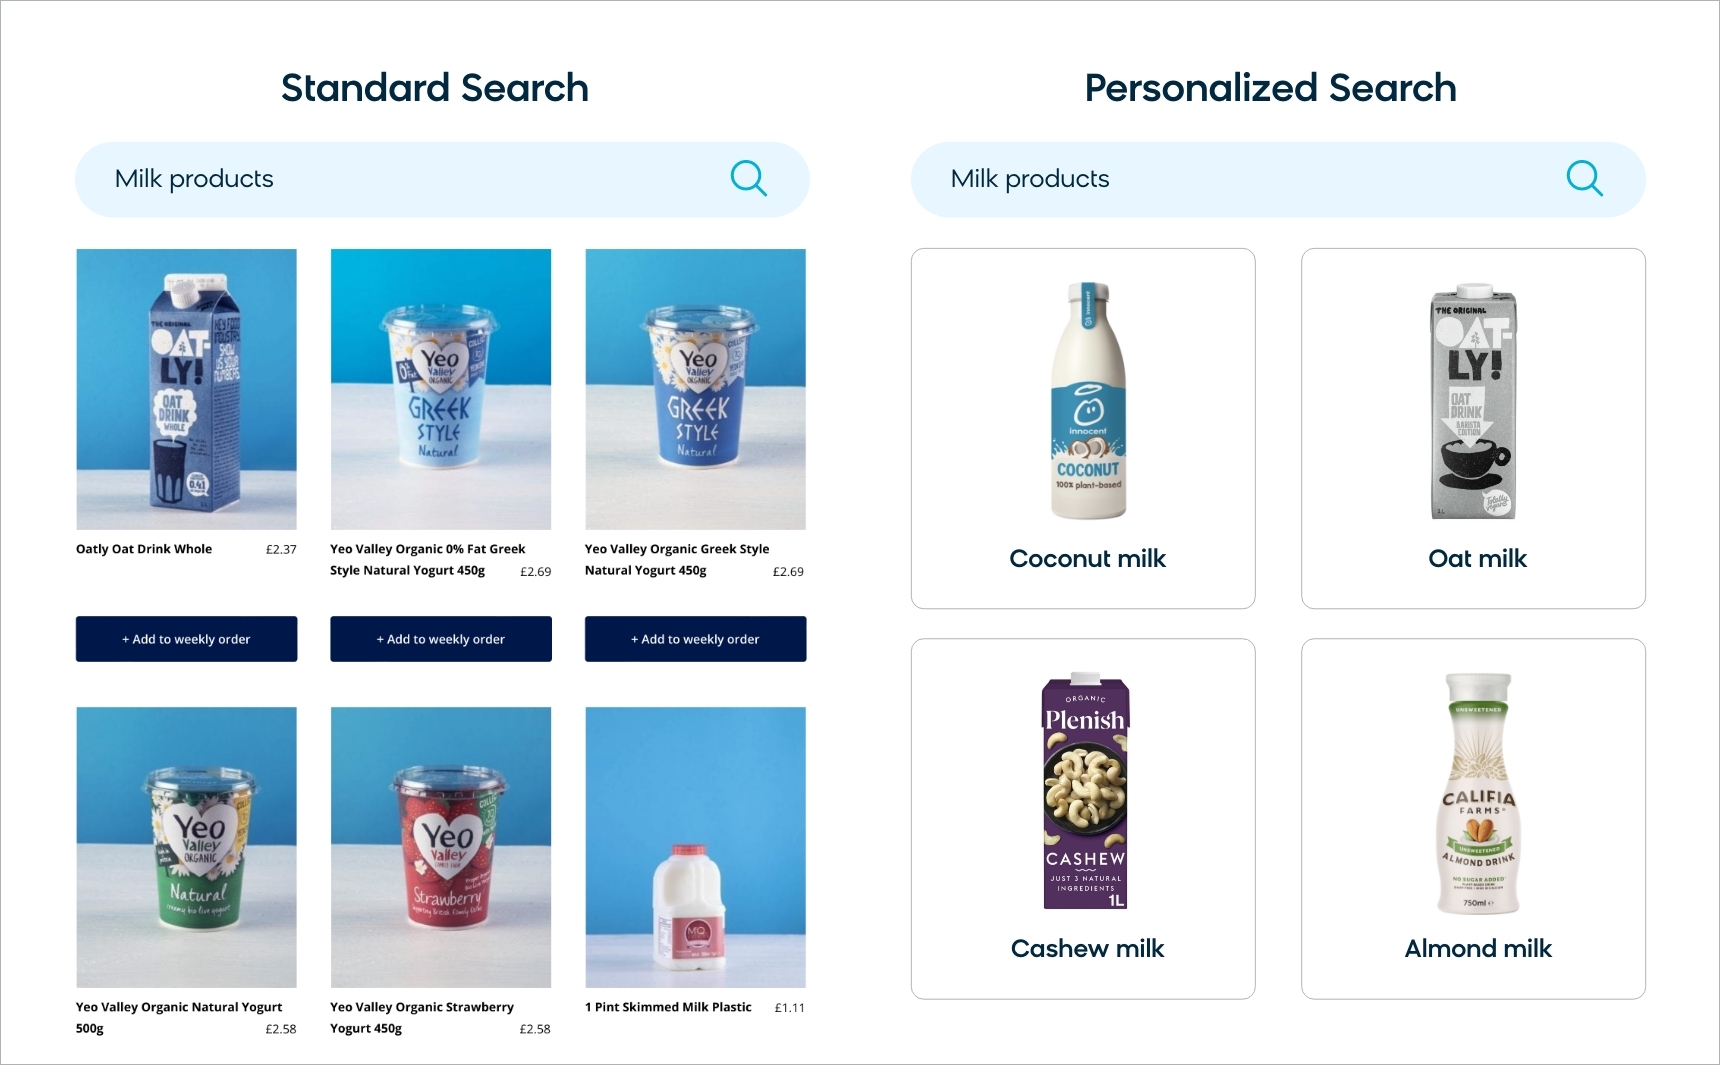 Personalized search results for milk products based on customer preferences